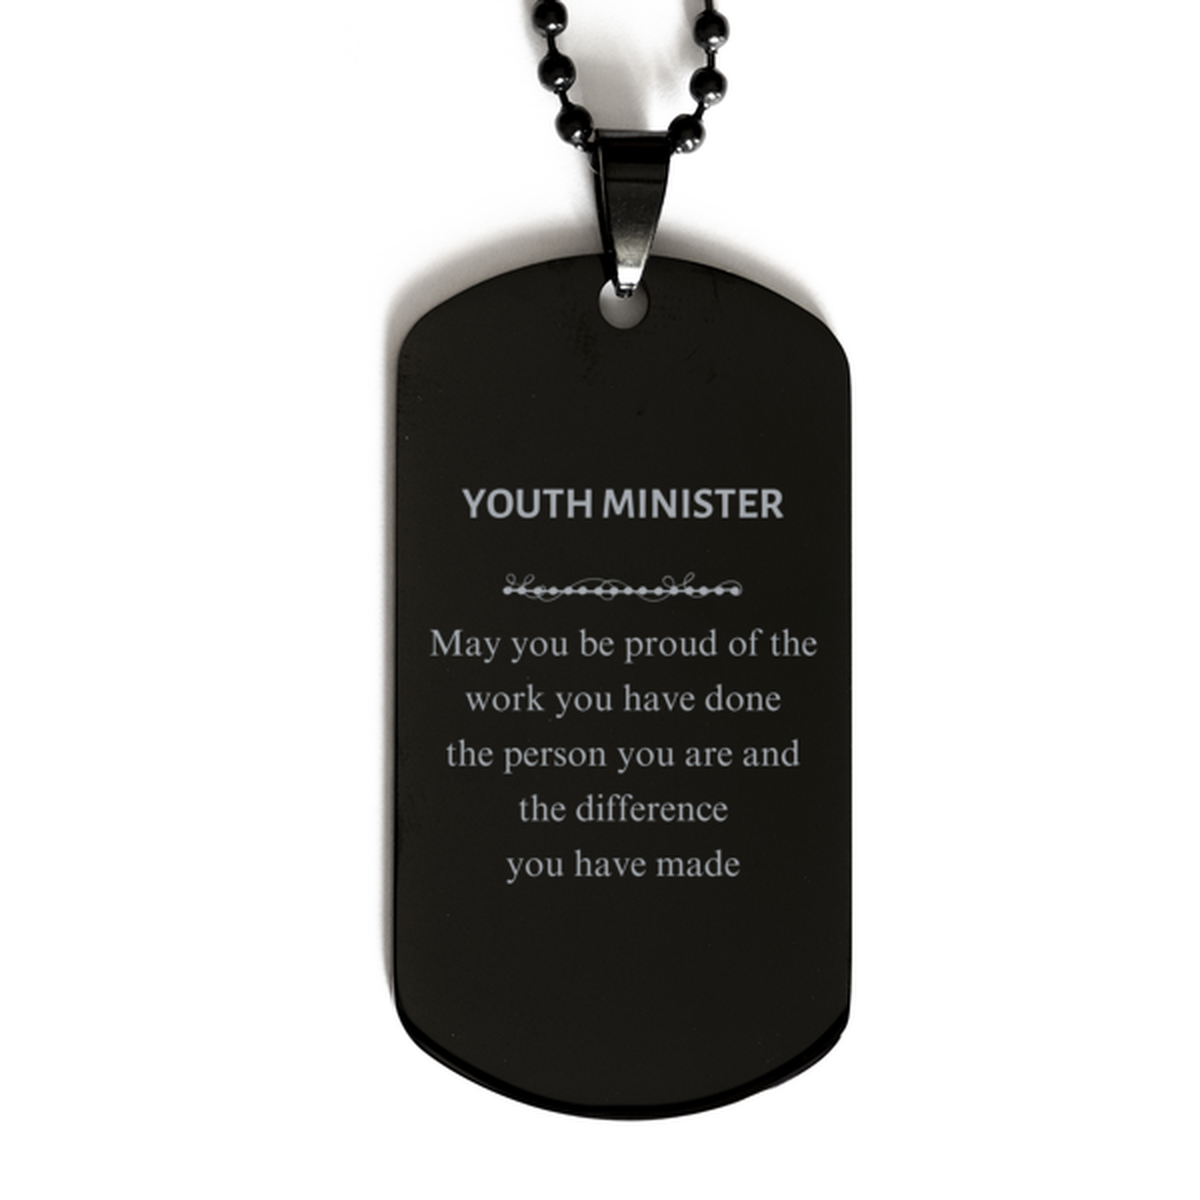 Youth Minister May you be proud of the work you have done, Retirement Youth Minister Black Dog Tag for Colleague Appreciation Gifts Amazing for Youth Minister